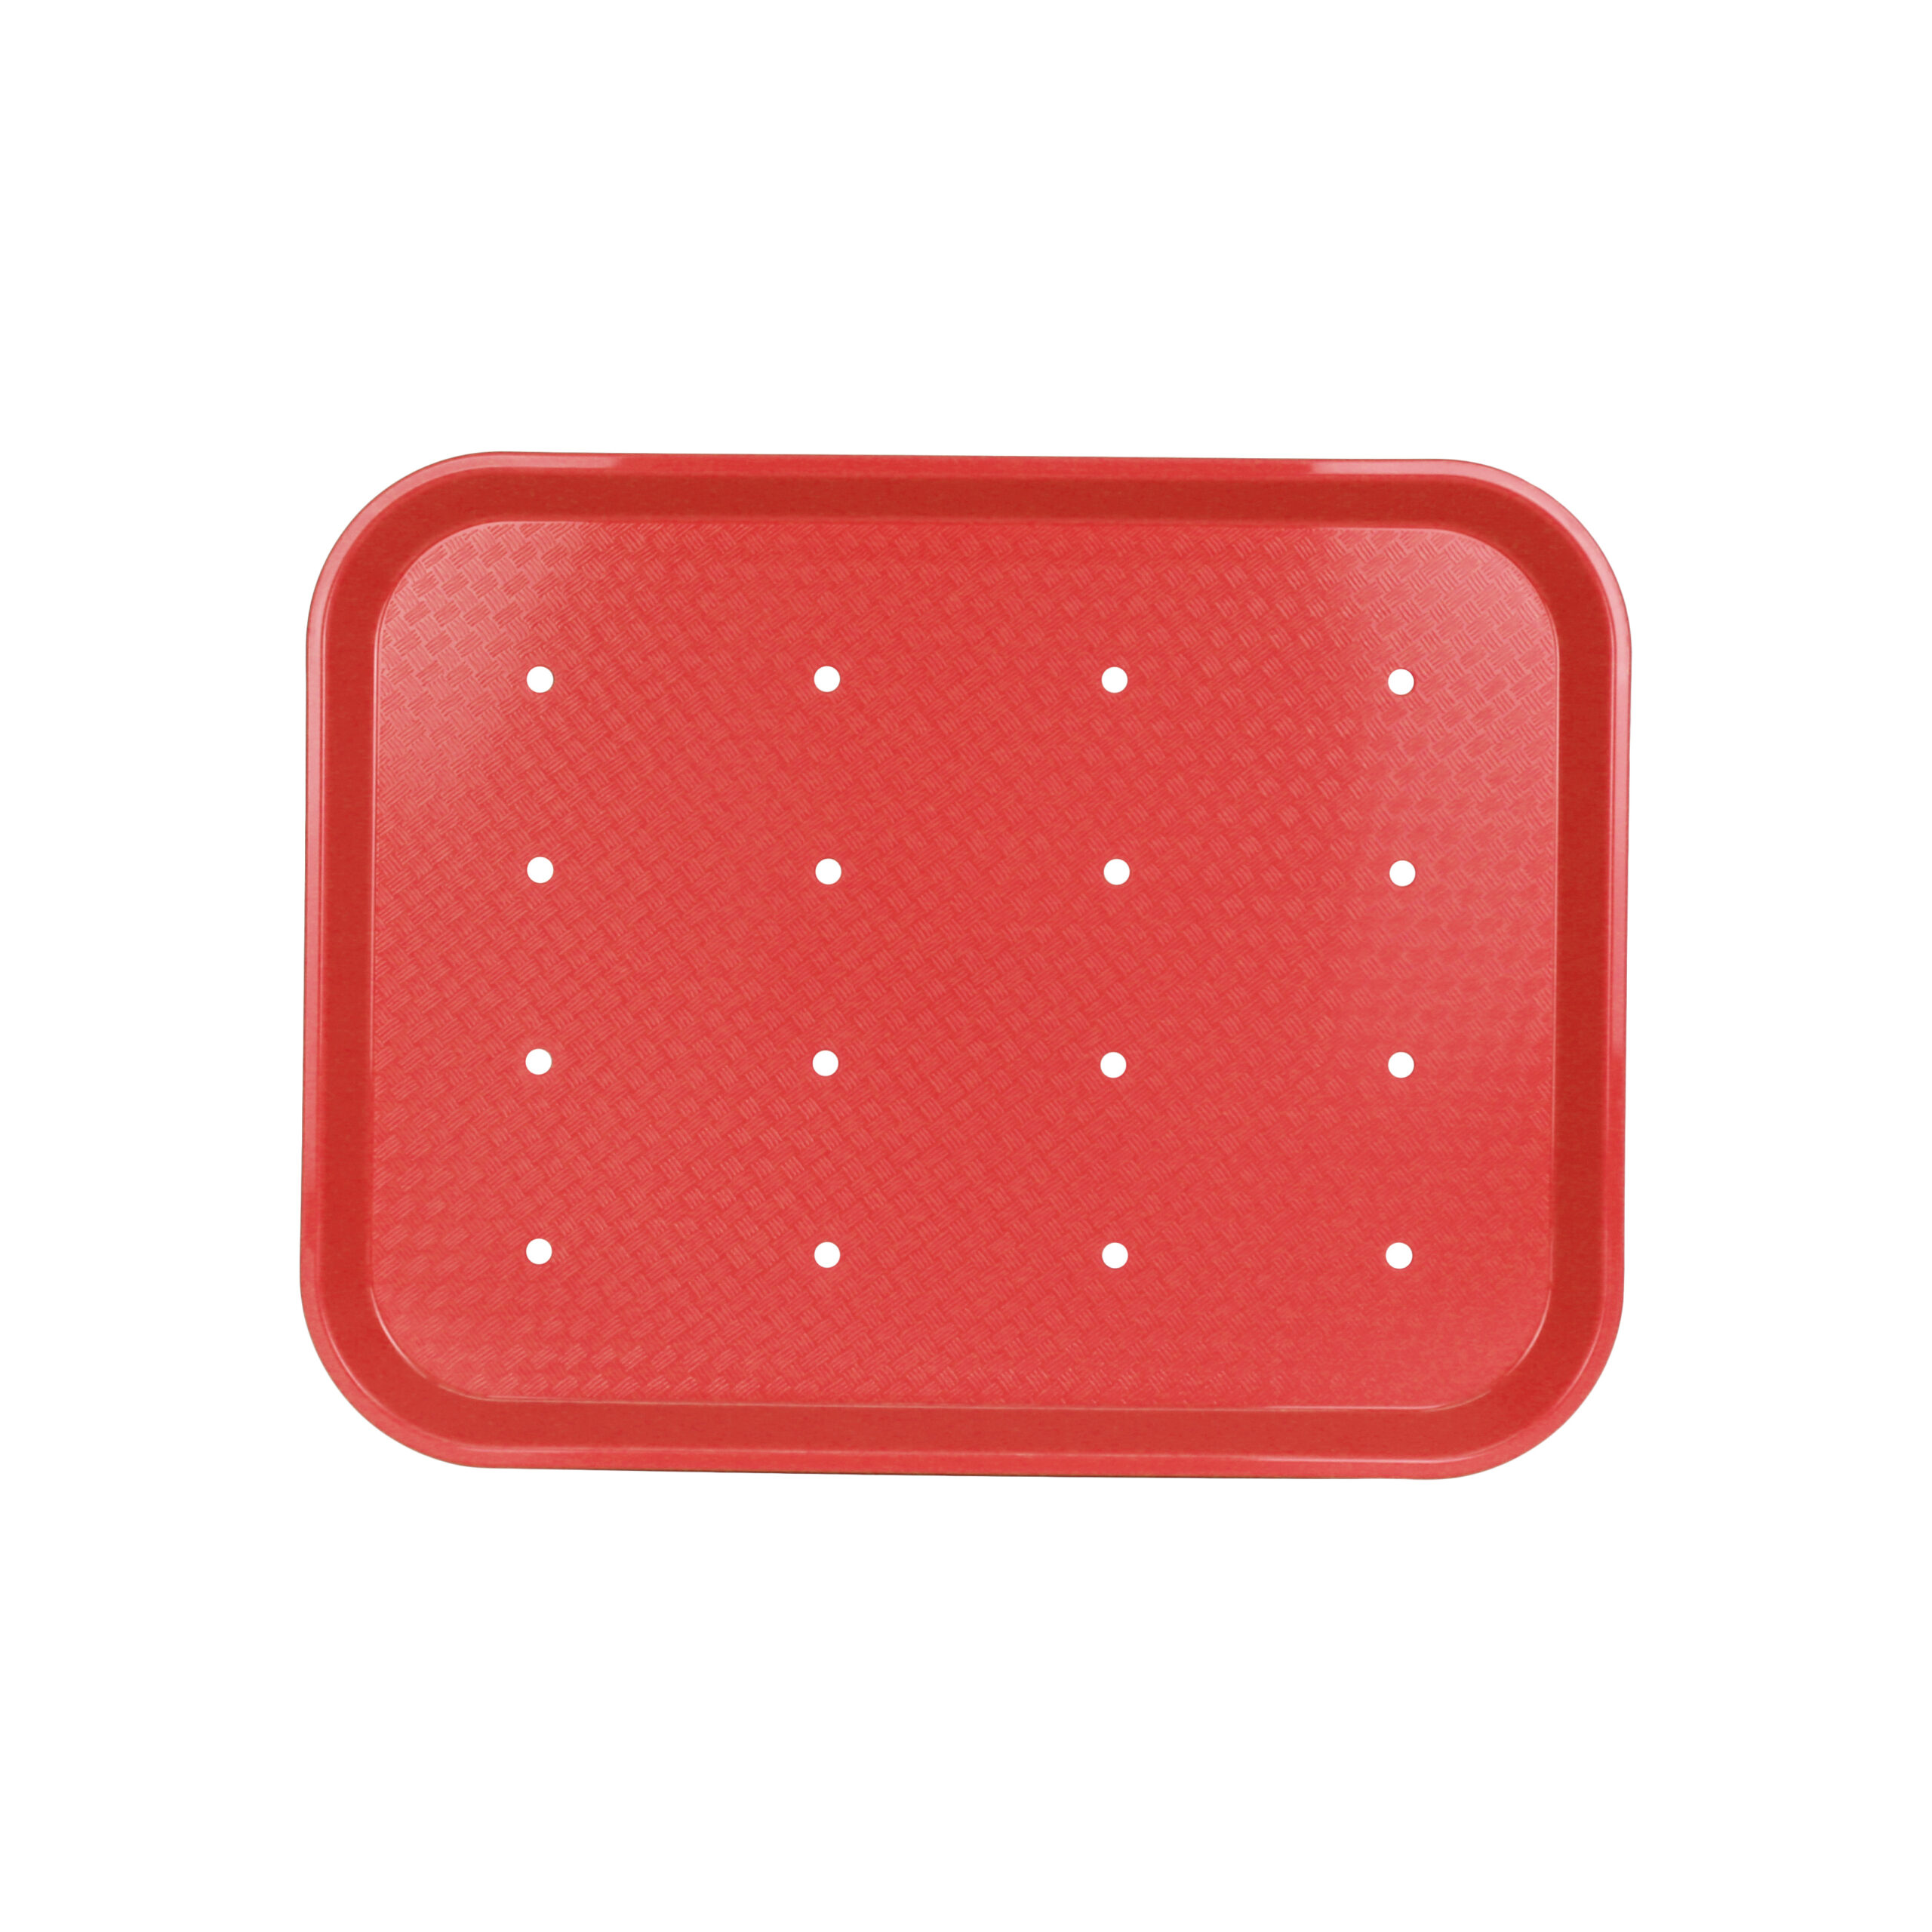 Instrument Care - Round & Rectangular Made in America Magnifiers -  Healthmark Industries